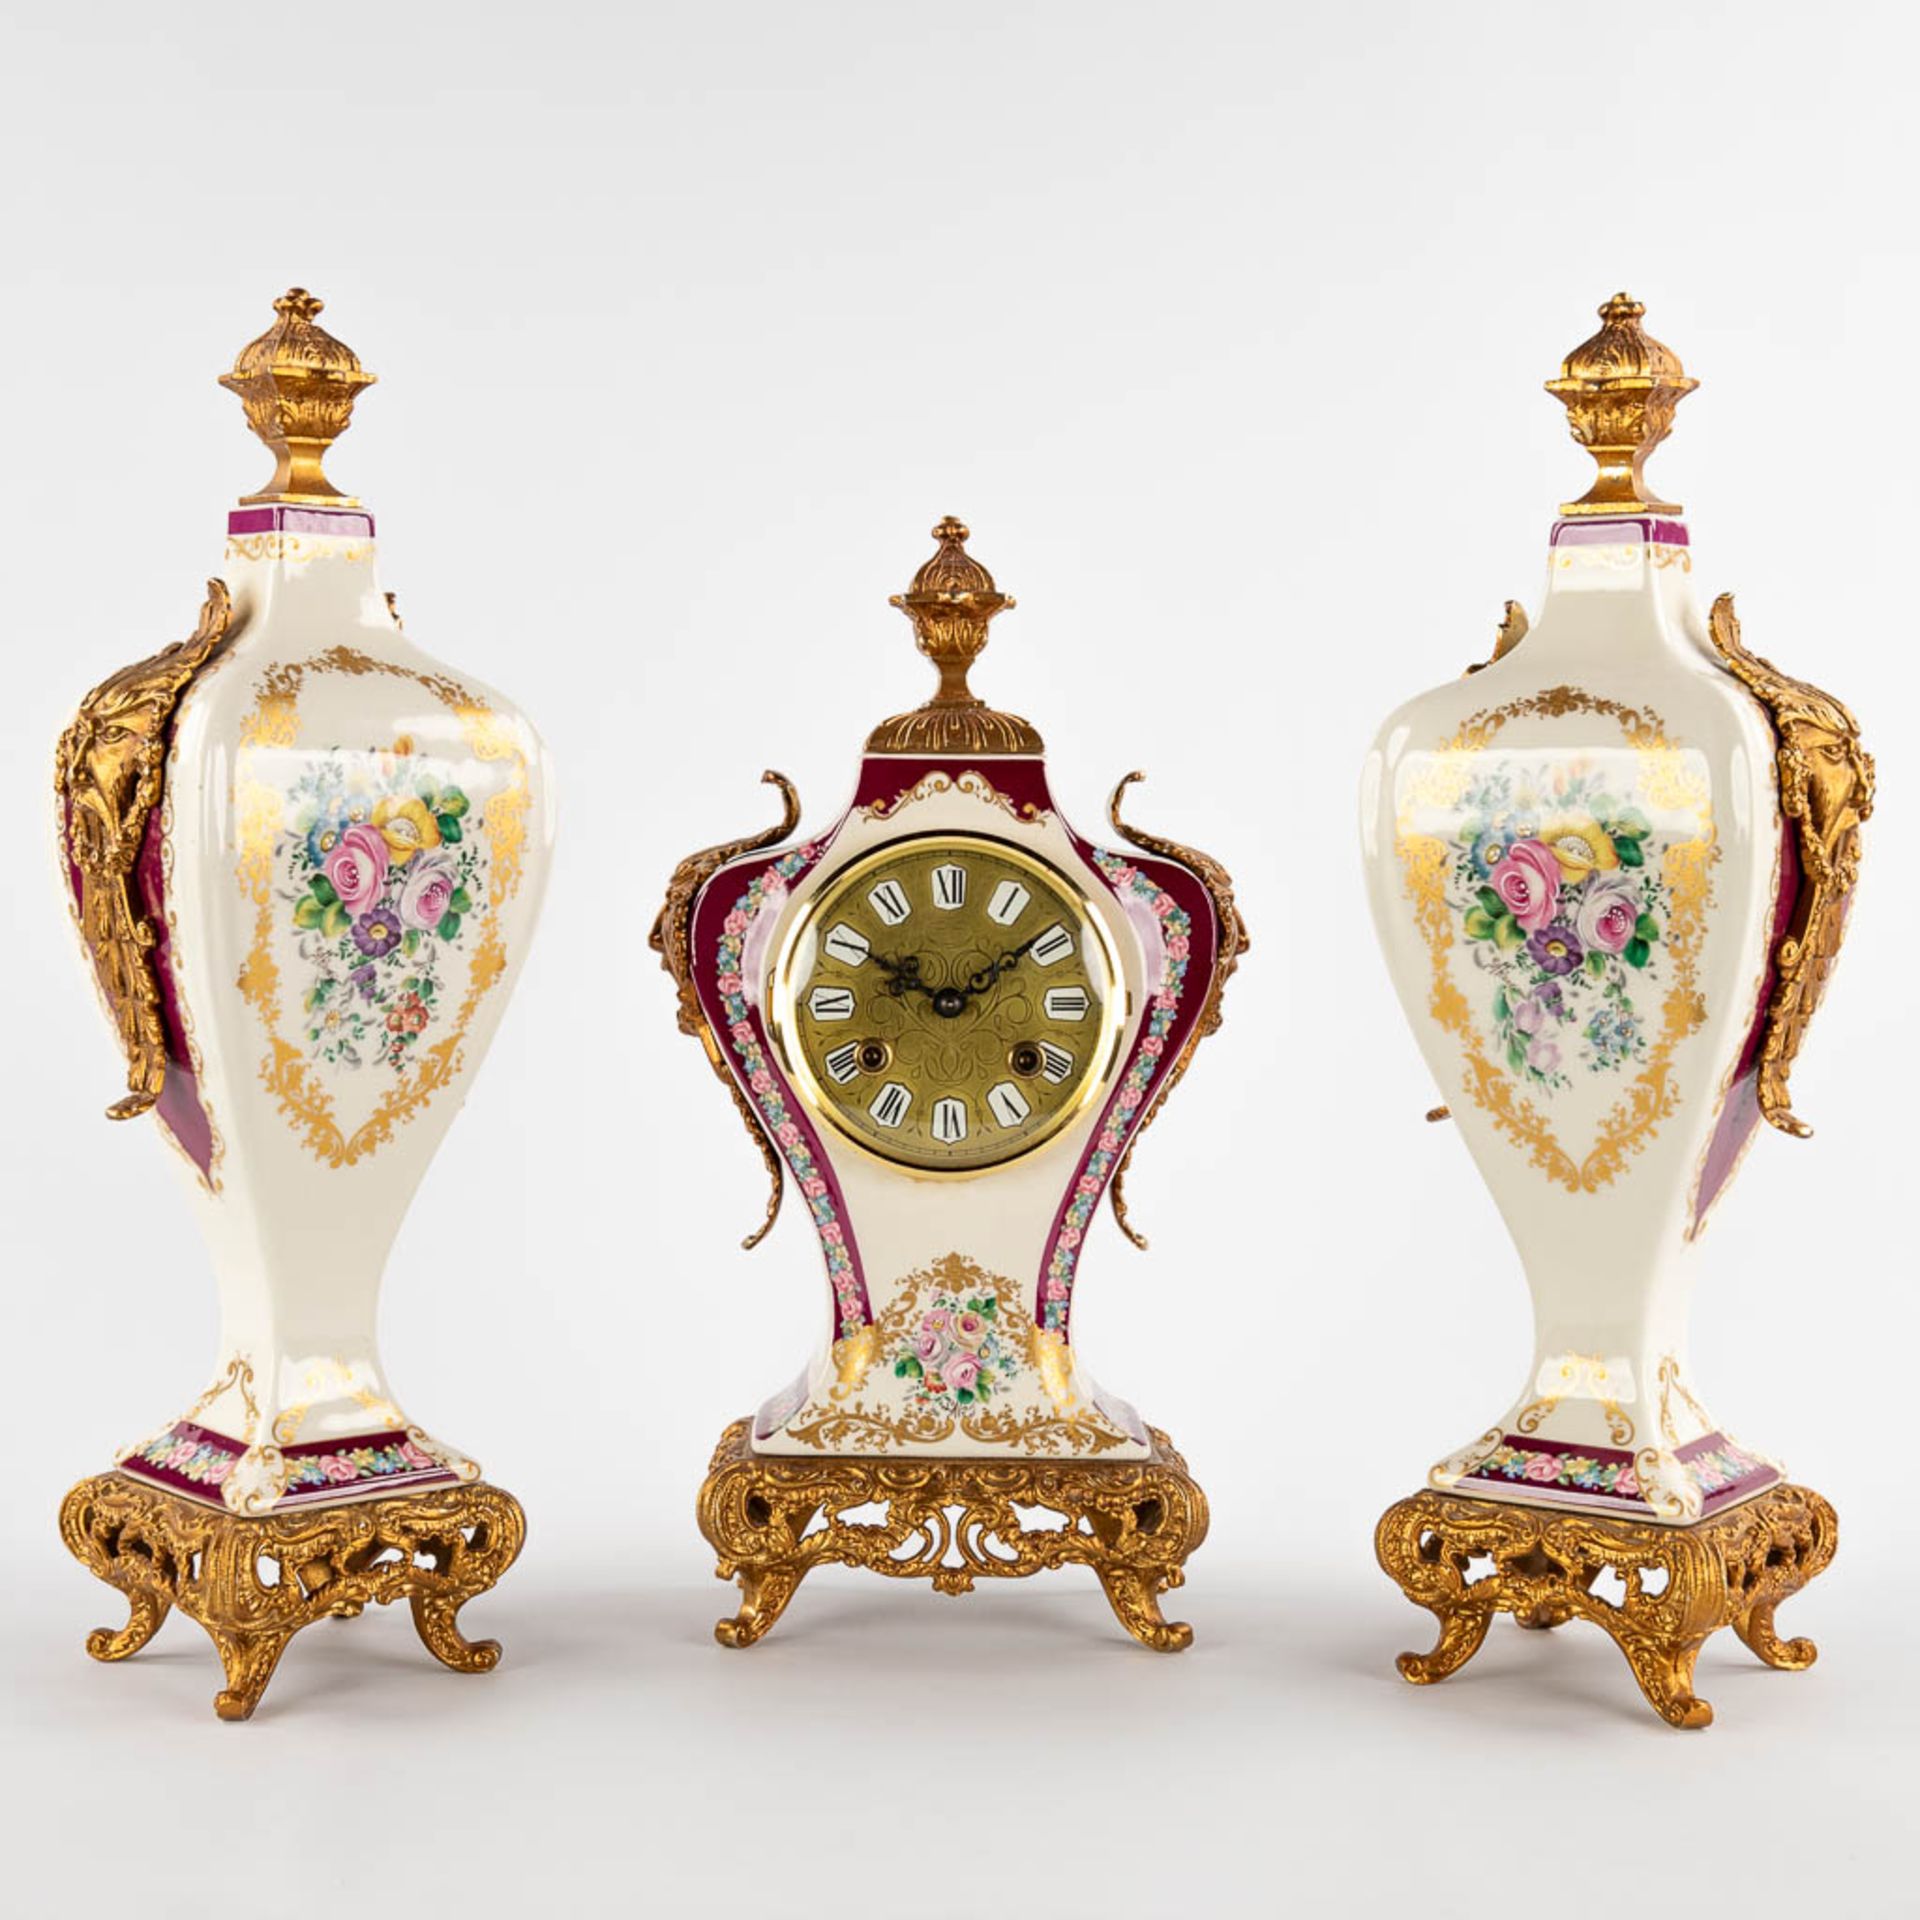 A three-piece mantle garniture clock and side pieces, porcelain mounted with bronze and floral decor